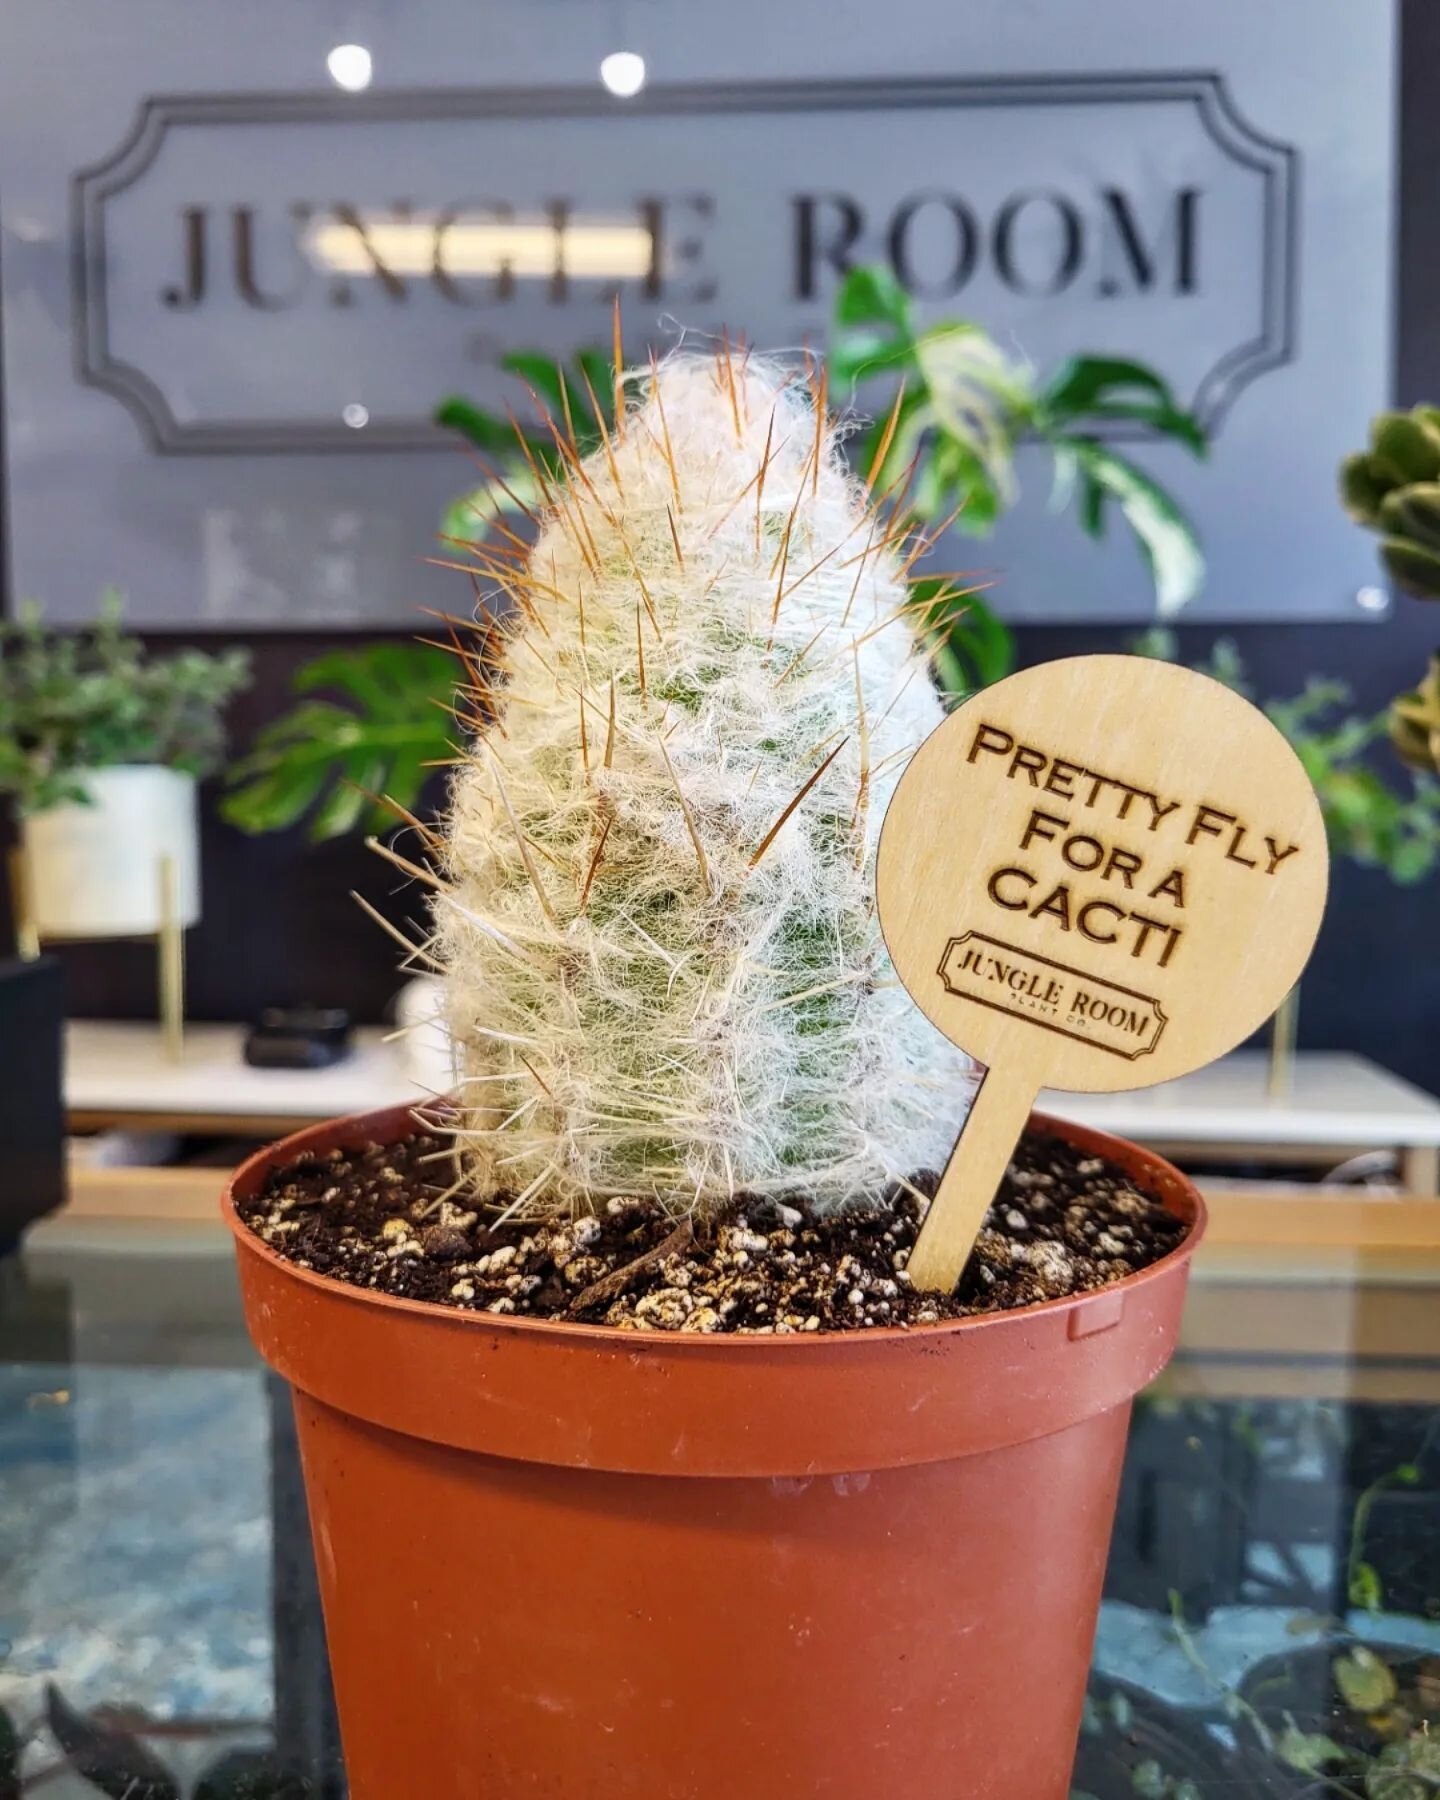 ✨️CEPHAOCEREUS SENILIS (Old Man of The Andes Cactus, Bearded Cactus, Mummy Cactus)✨️

📍Native to Mexico
🌡 Lives in temperatures of 50-90&deg;
💦 Depending on lighting/temperature, this cactus needs to be watered about every two weeks. Let the top f